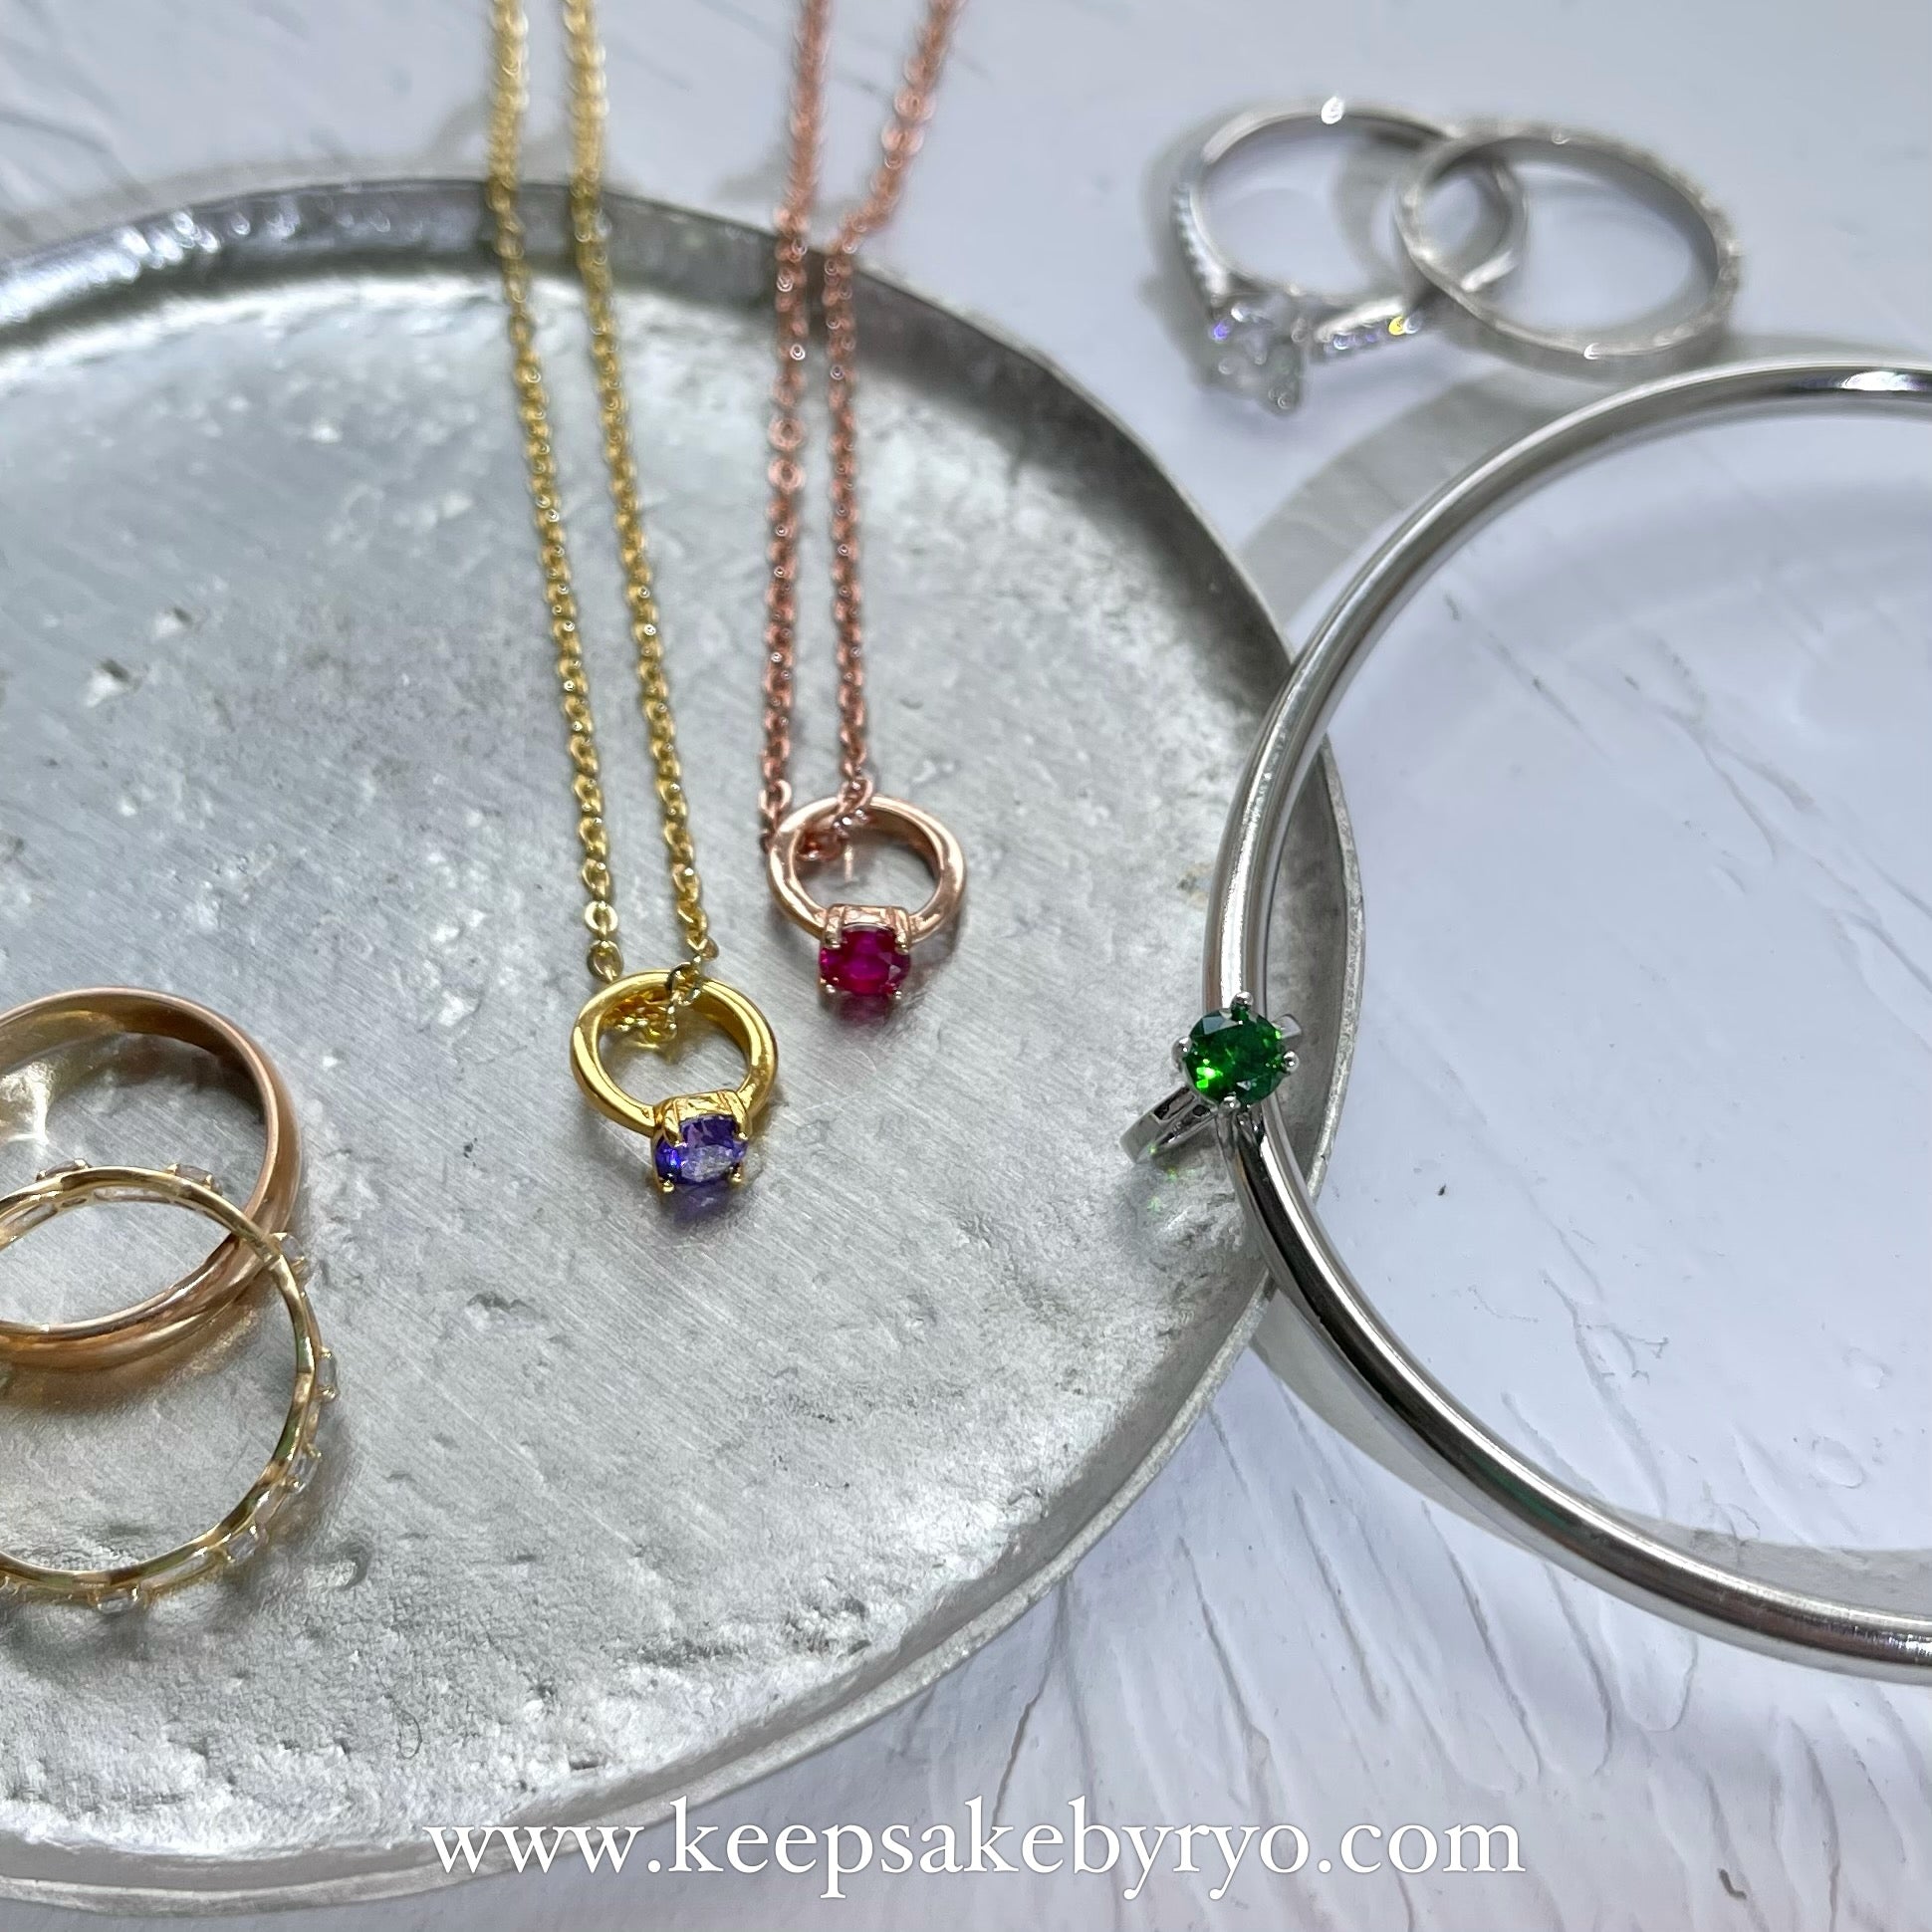 KEEPLETS COLLECTION: BABY MILESTONE MINI RING (CHARM OR PENDANT)